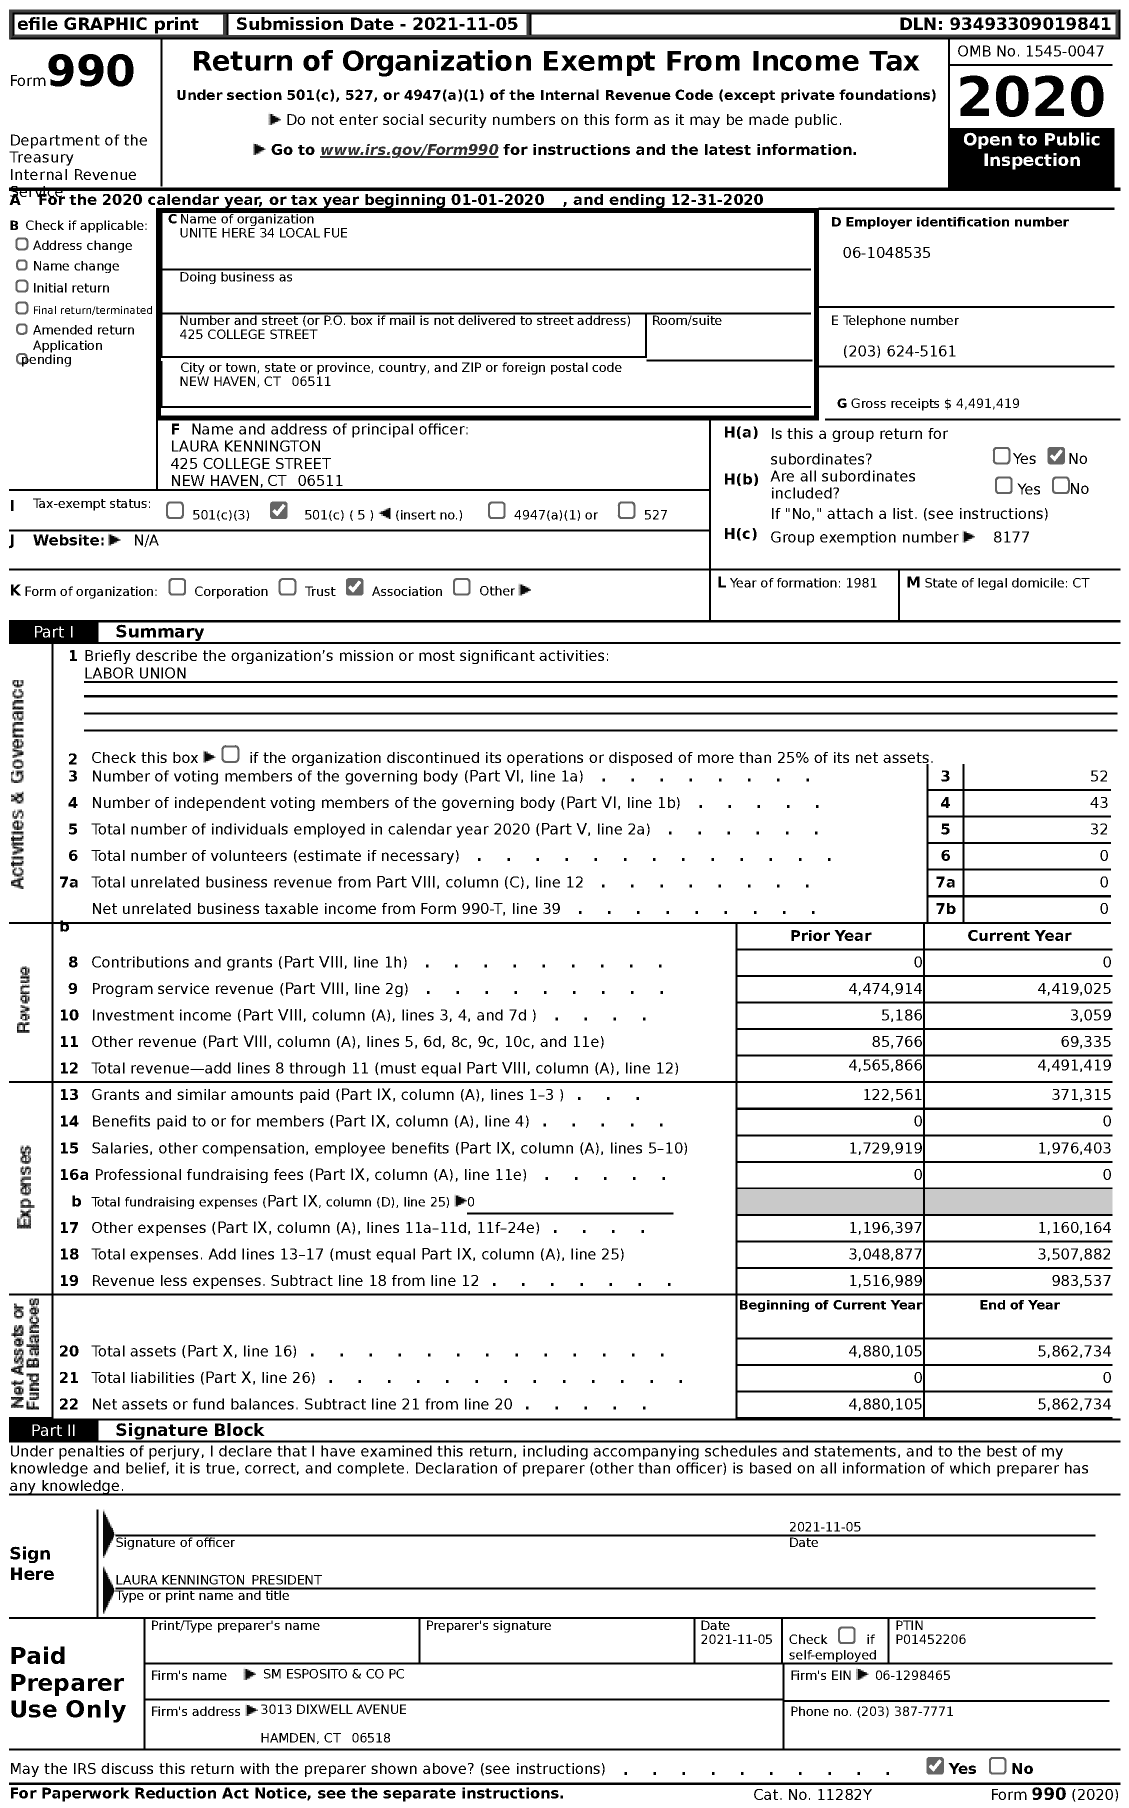 Image of first page of 2020 Form 990 for Unite Here - 34 Local Fue